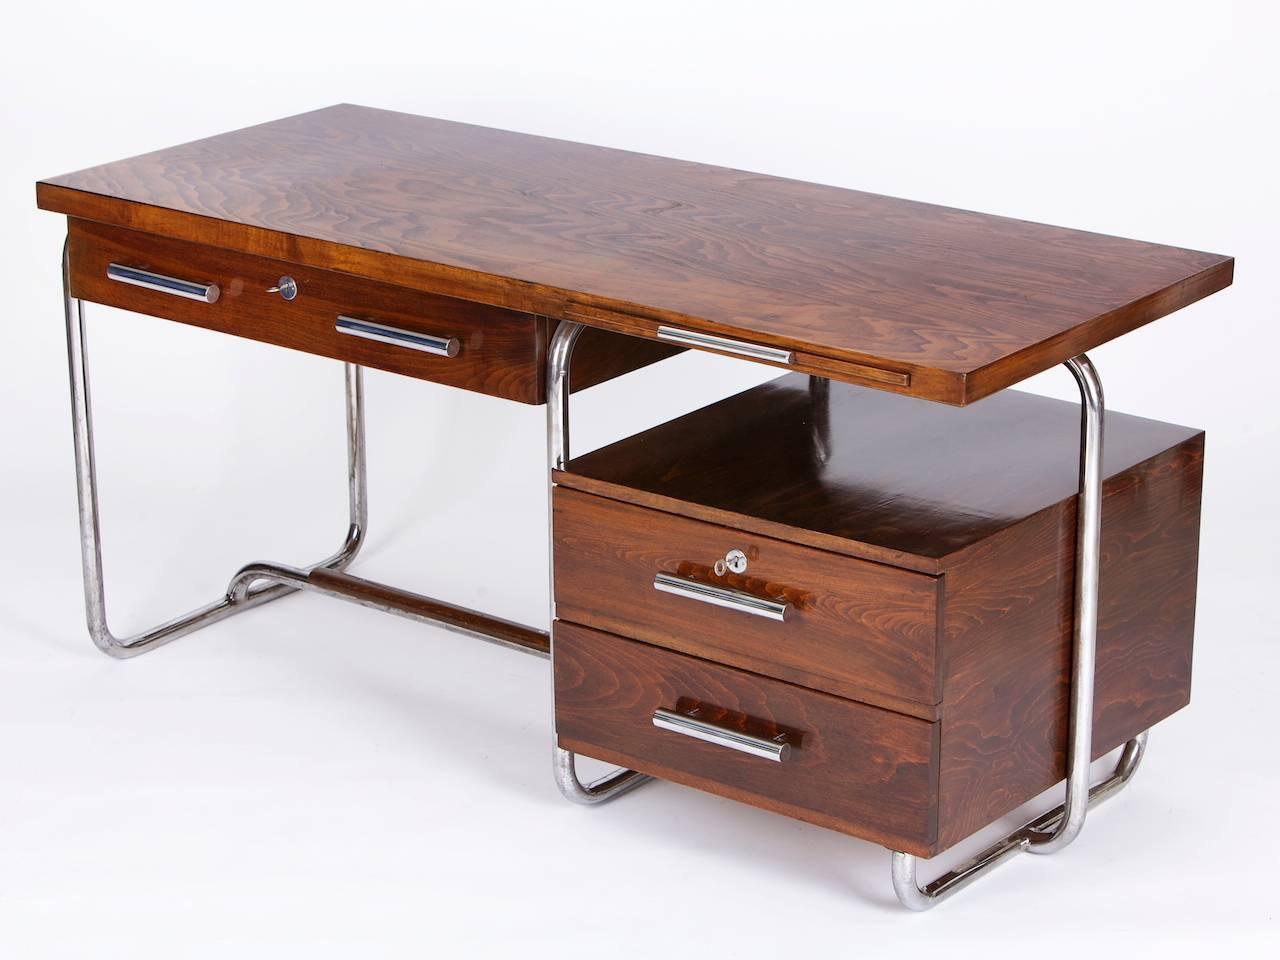 This chromed tubular steel desk was designed and produced by Hynek Gottwald in the early 1930s in former Czechoslovakia. 
The wooden parts has been restored and the tubular steel construction remained in a good original vintage condition with some